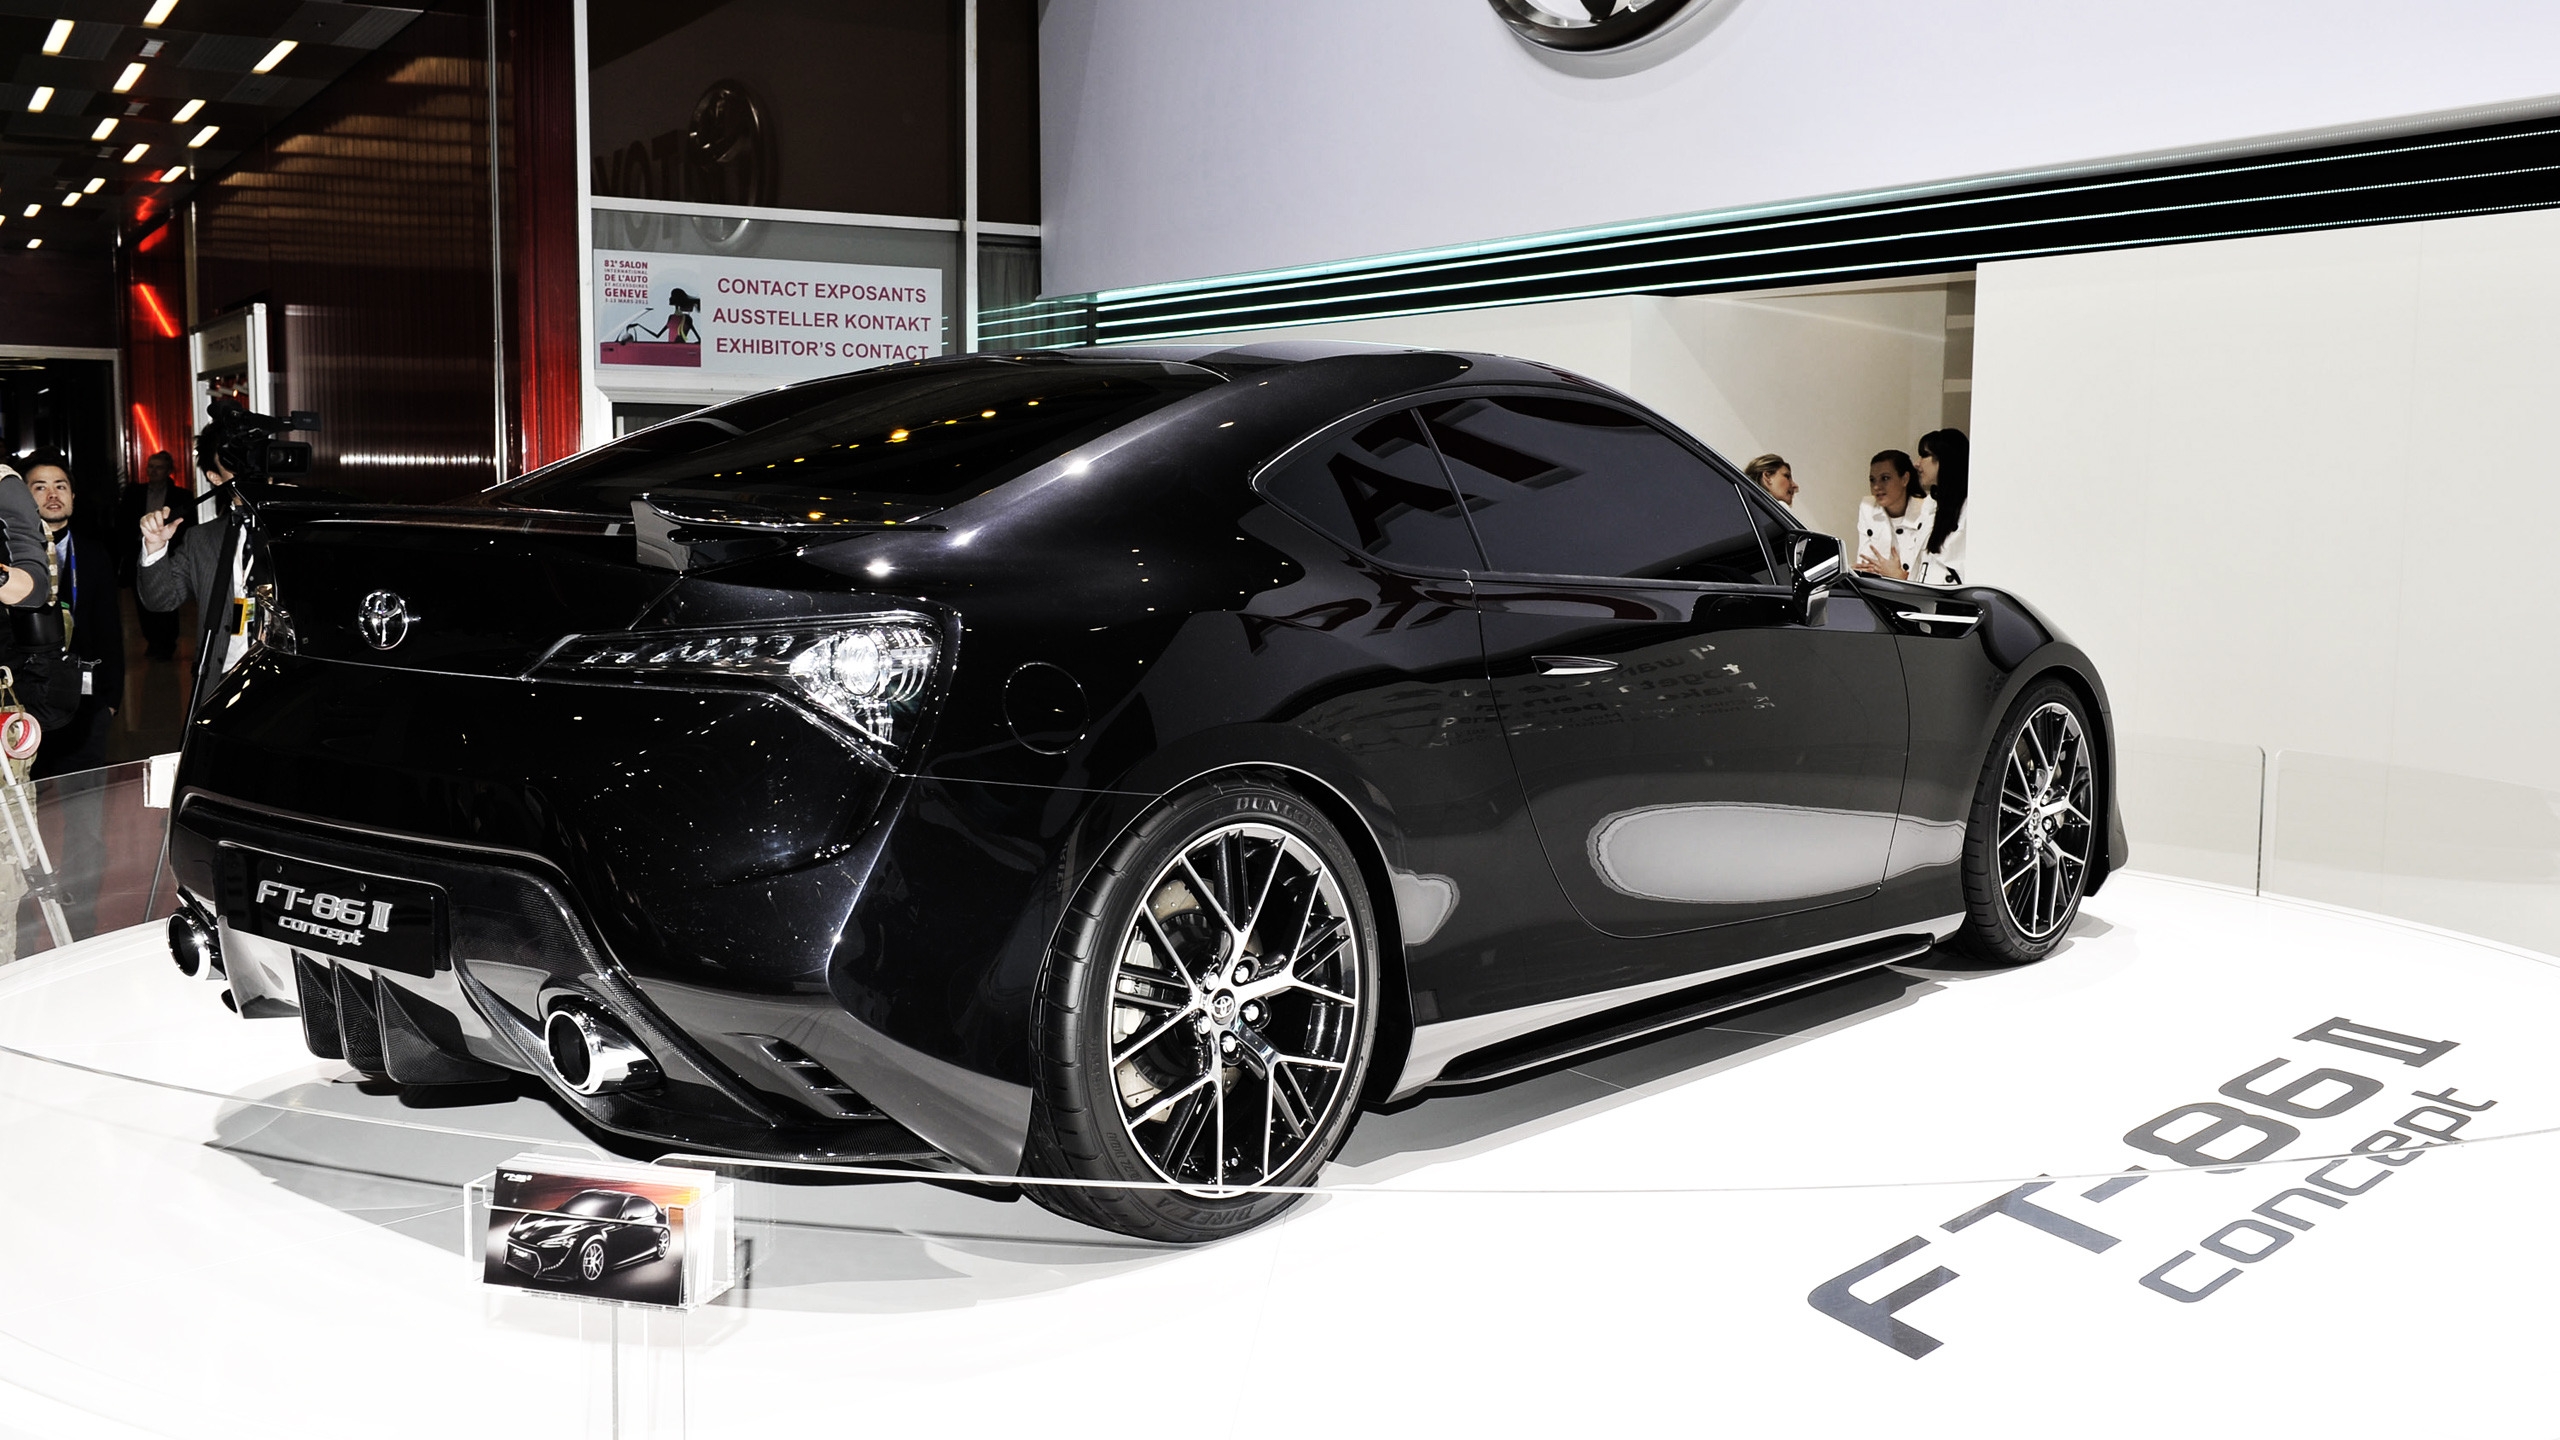 Toyota FT-86 II Rear for 2560x1440 HDTV resolution